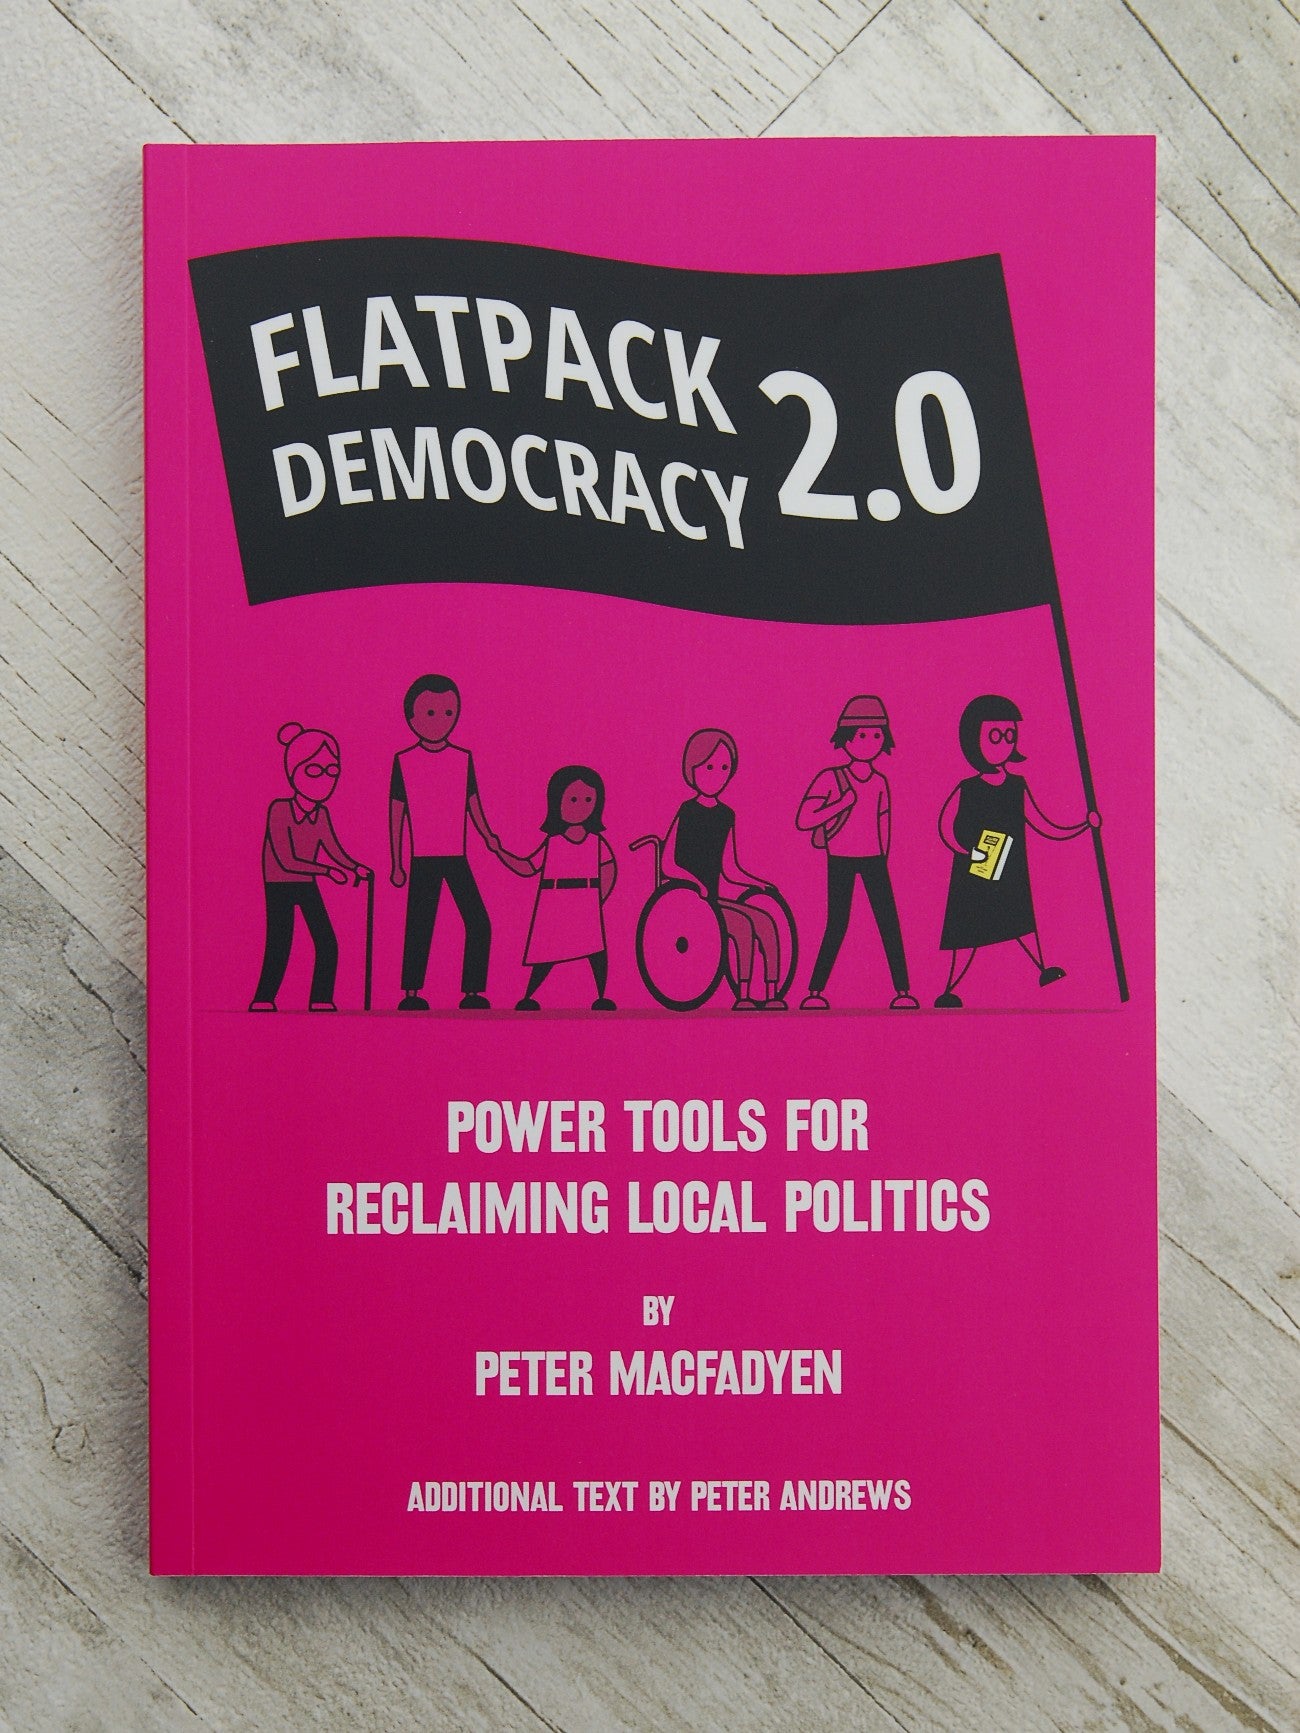 Flatpack Democracy 2.0: Power Tools for Reclaiming Local Politics